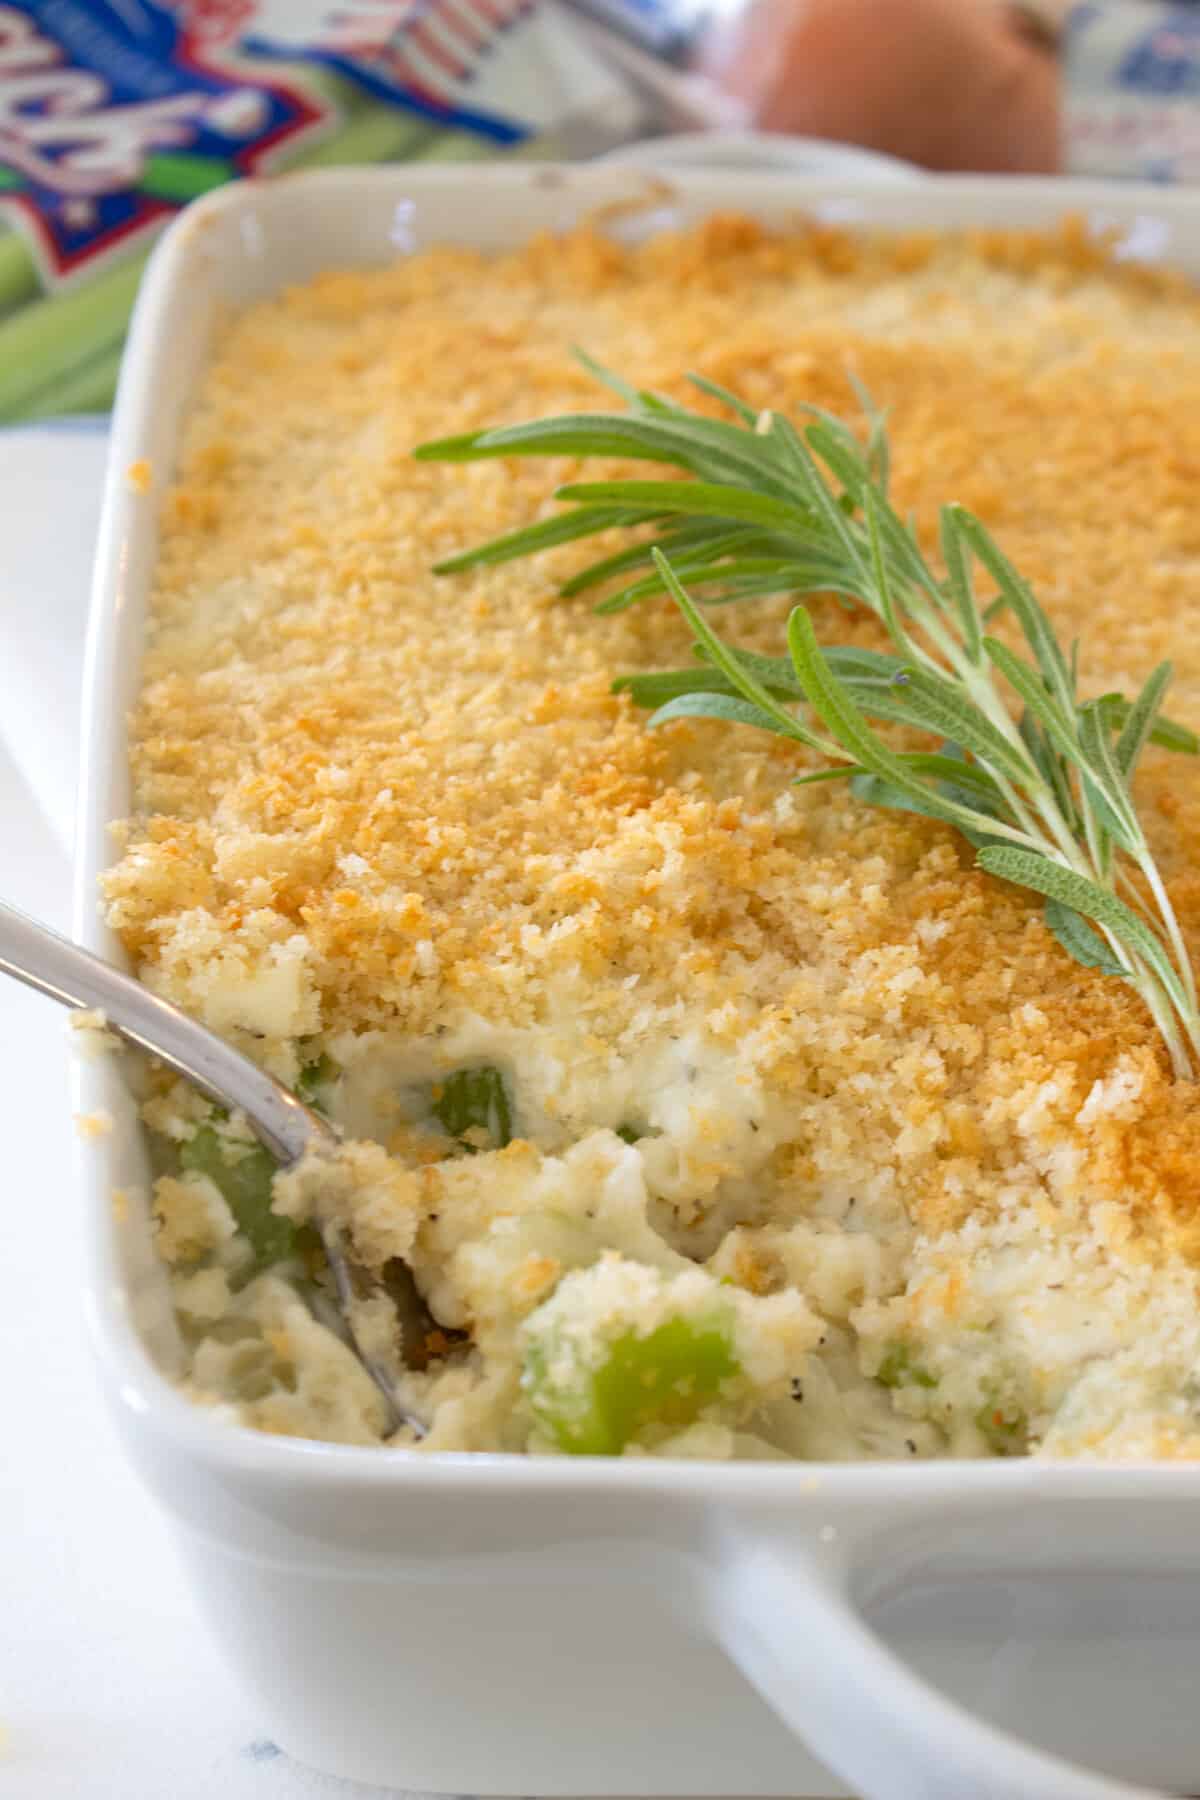 celery gratin in a white casserole dish with rosemary garnish